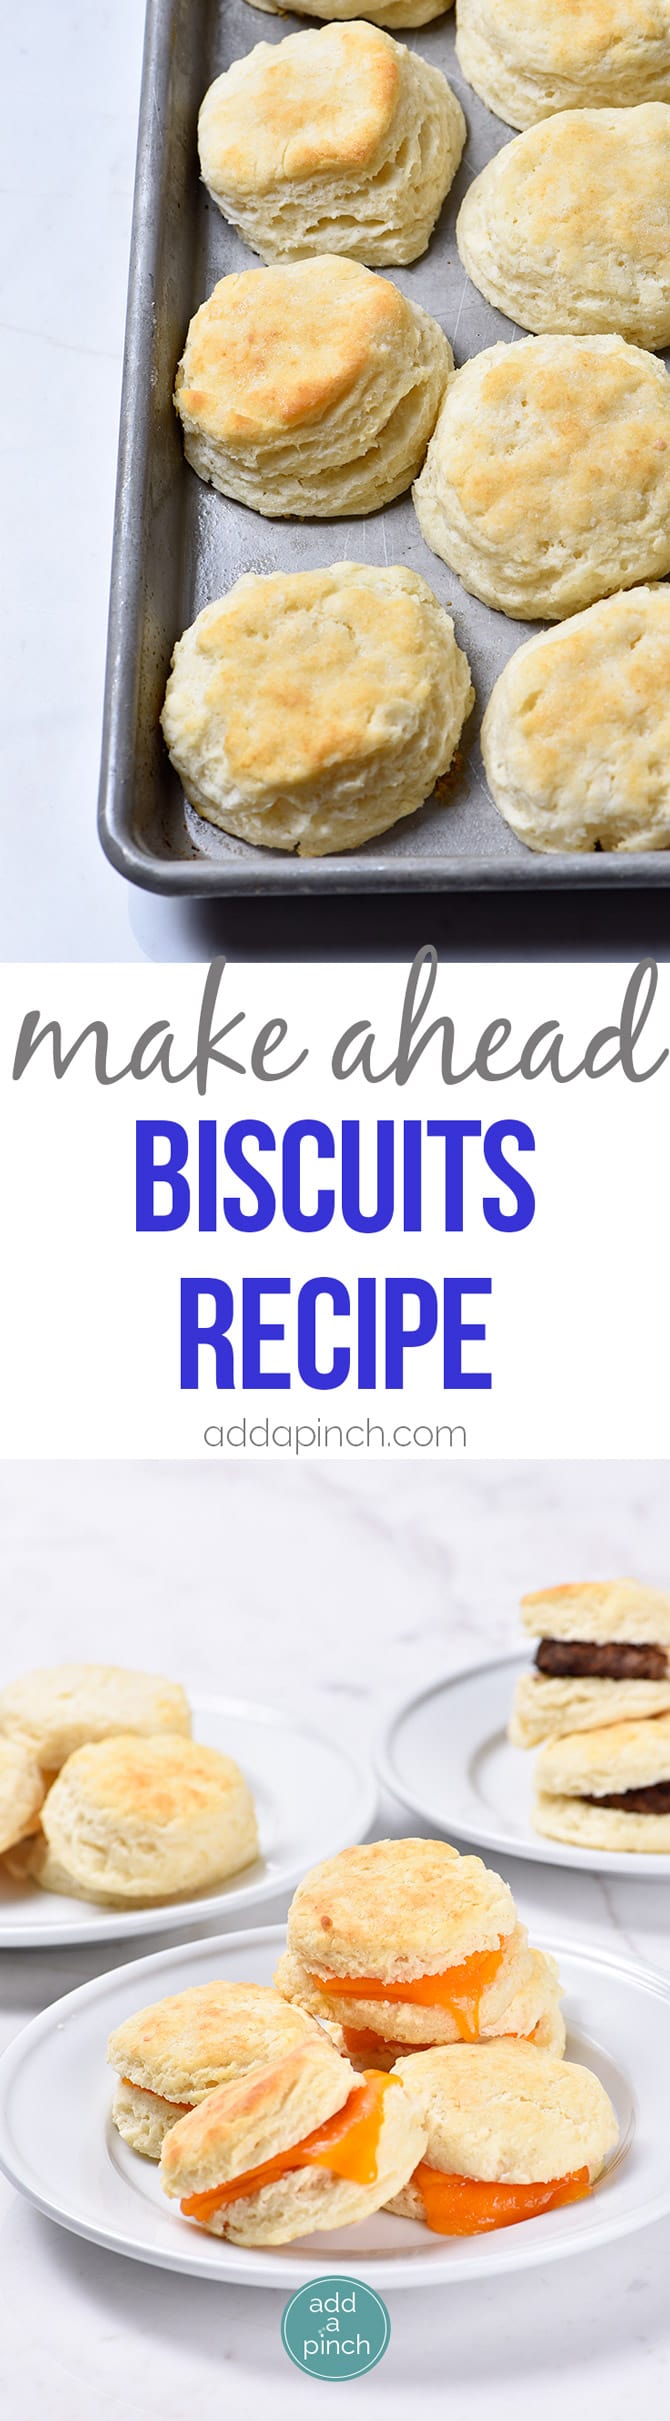 Make Ahead Biscuits Recipe - Make and bake biscuits ahead of time for quick and easy mornings! In less than 30 minutes, you'll have a week's worth of breakfast ready to grab, reheat and go! // addapinch.com